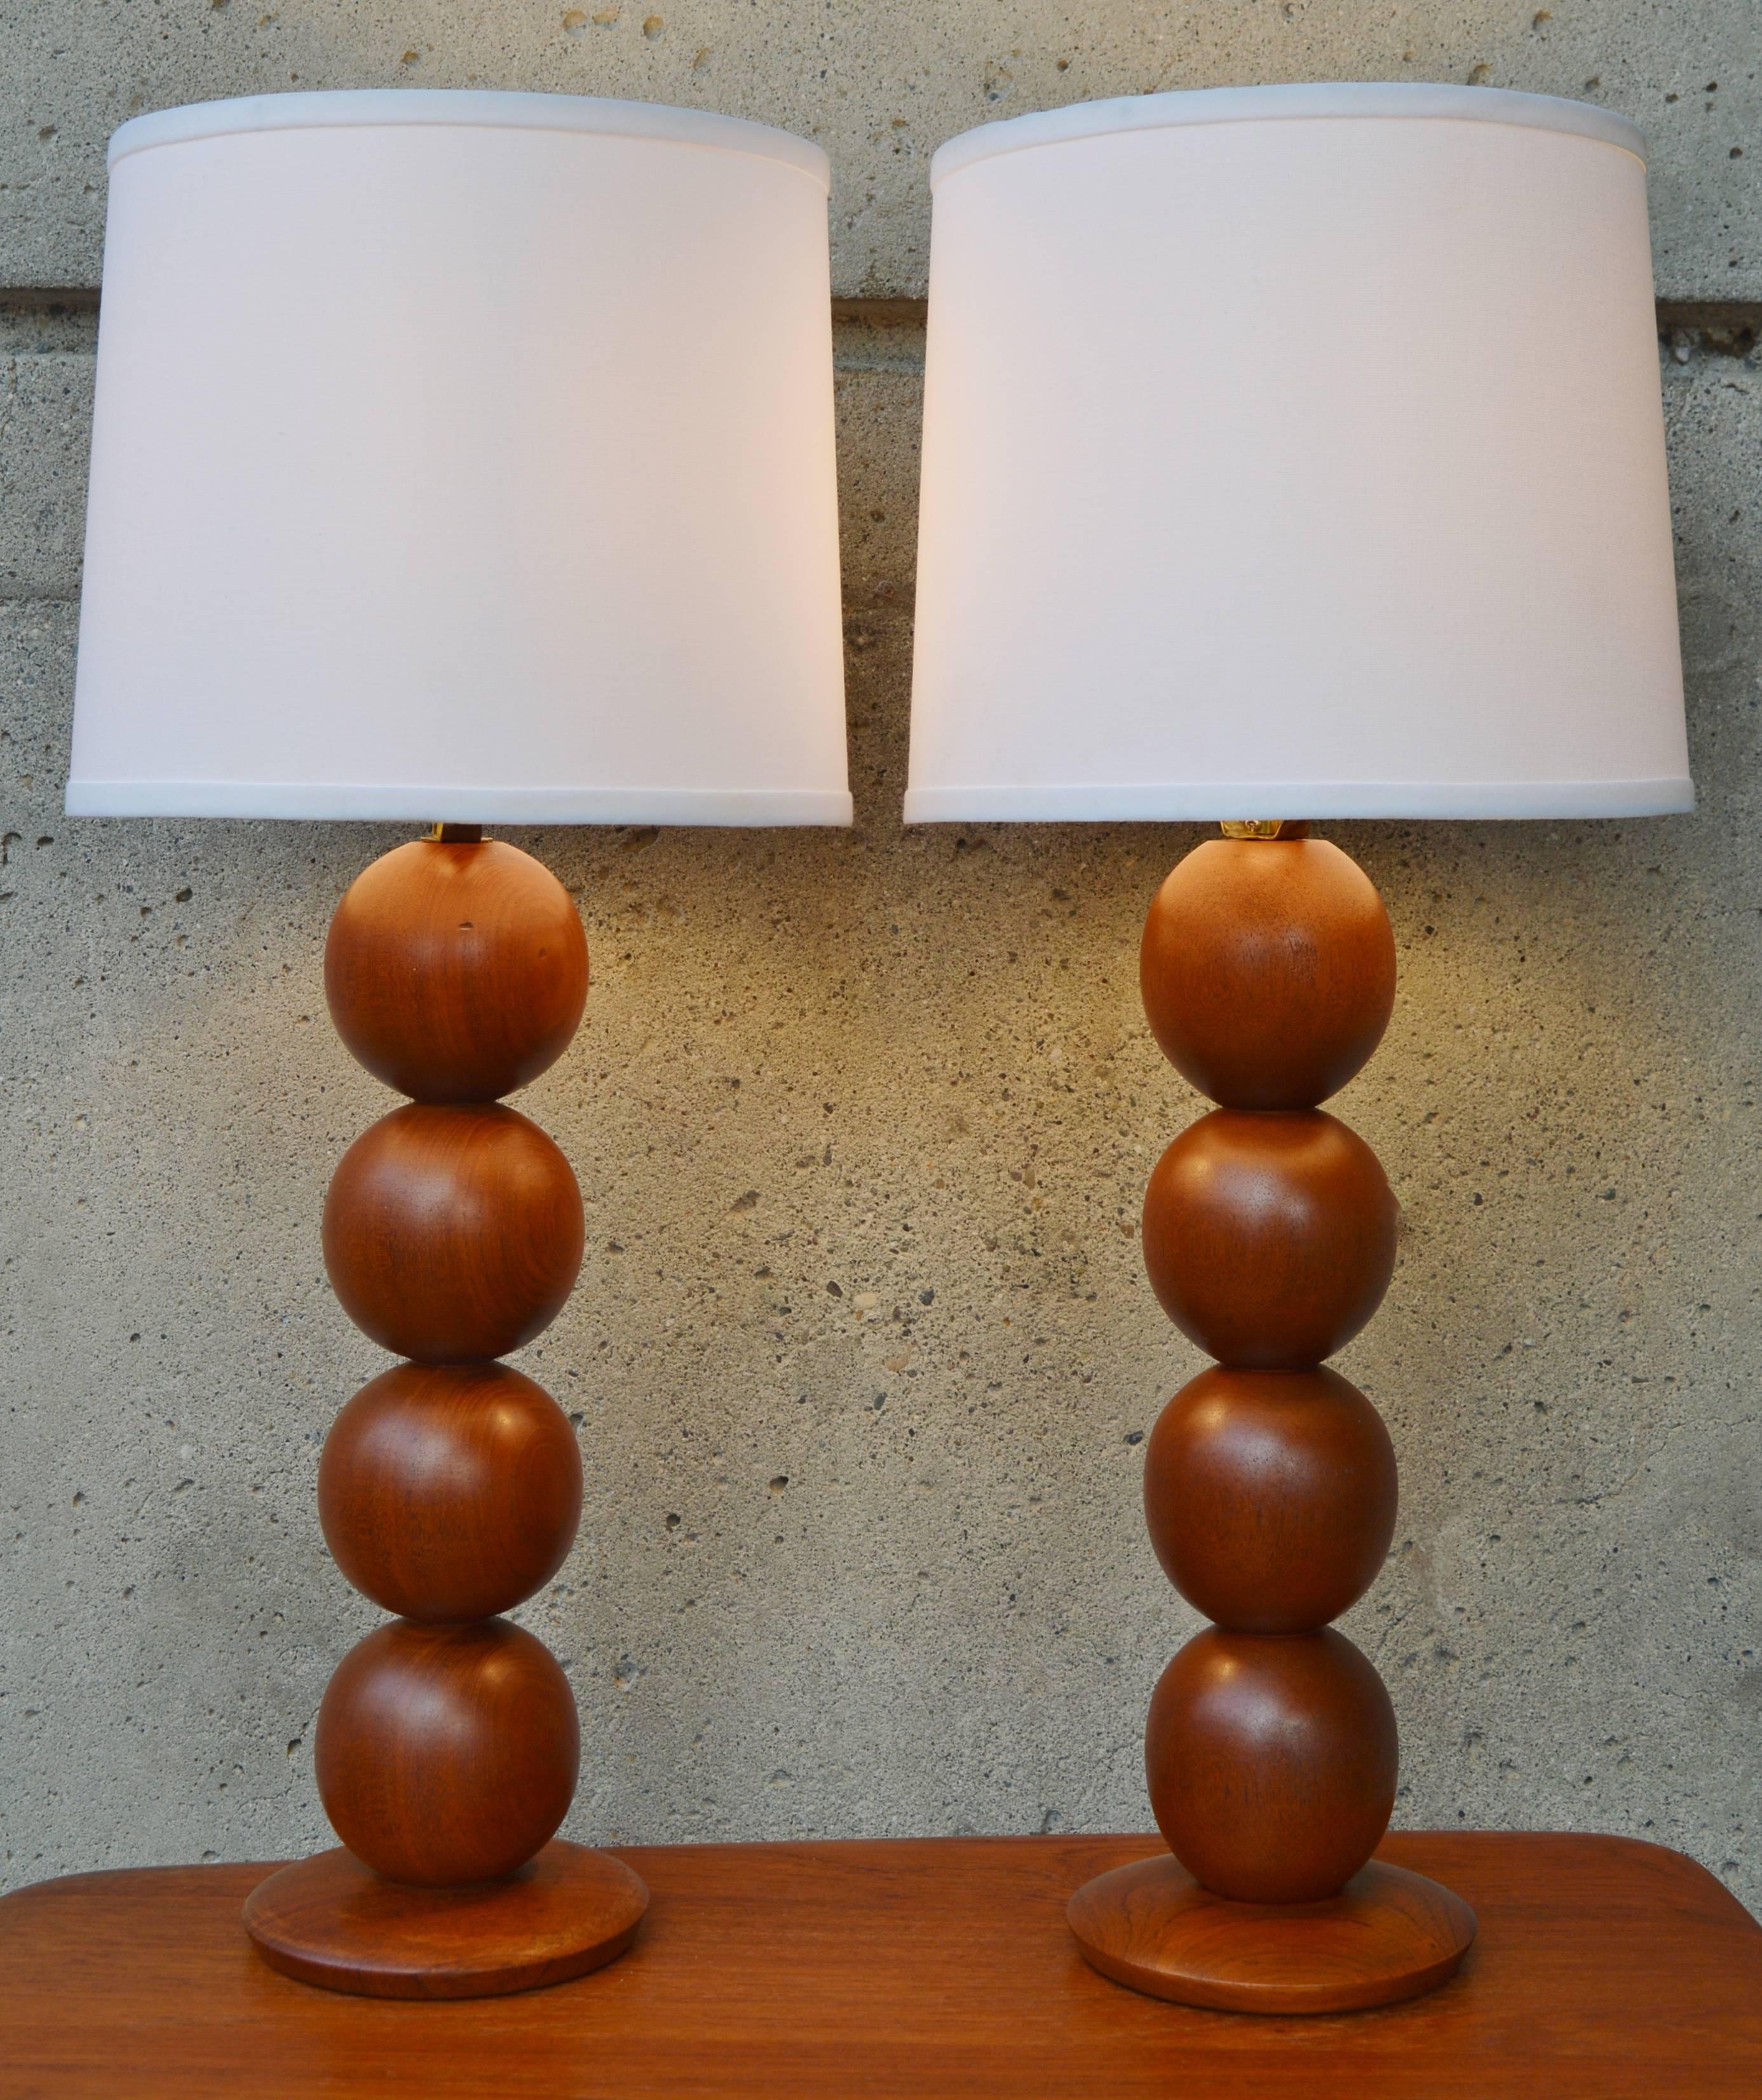 This wonderful geometric pair of Danish modern teak lamps are super dramatic, without taking up too large of a foot print. Featuring a contoured teak base and four teak stacked balls. Finished with new linen barrel shades in white. In wonderful